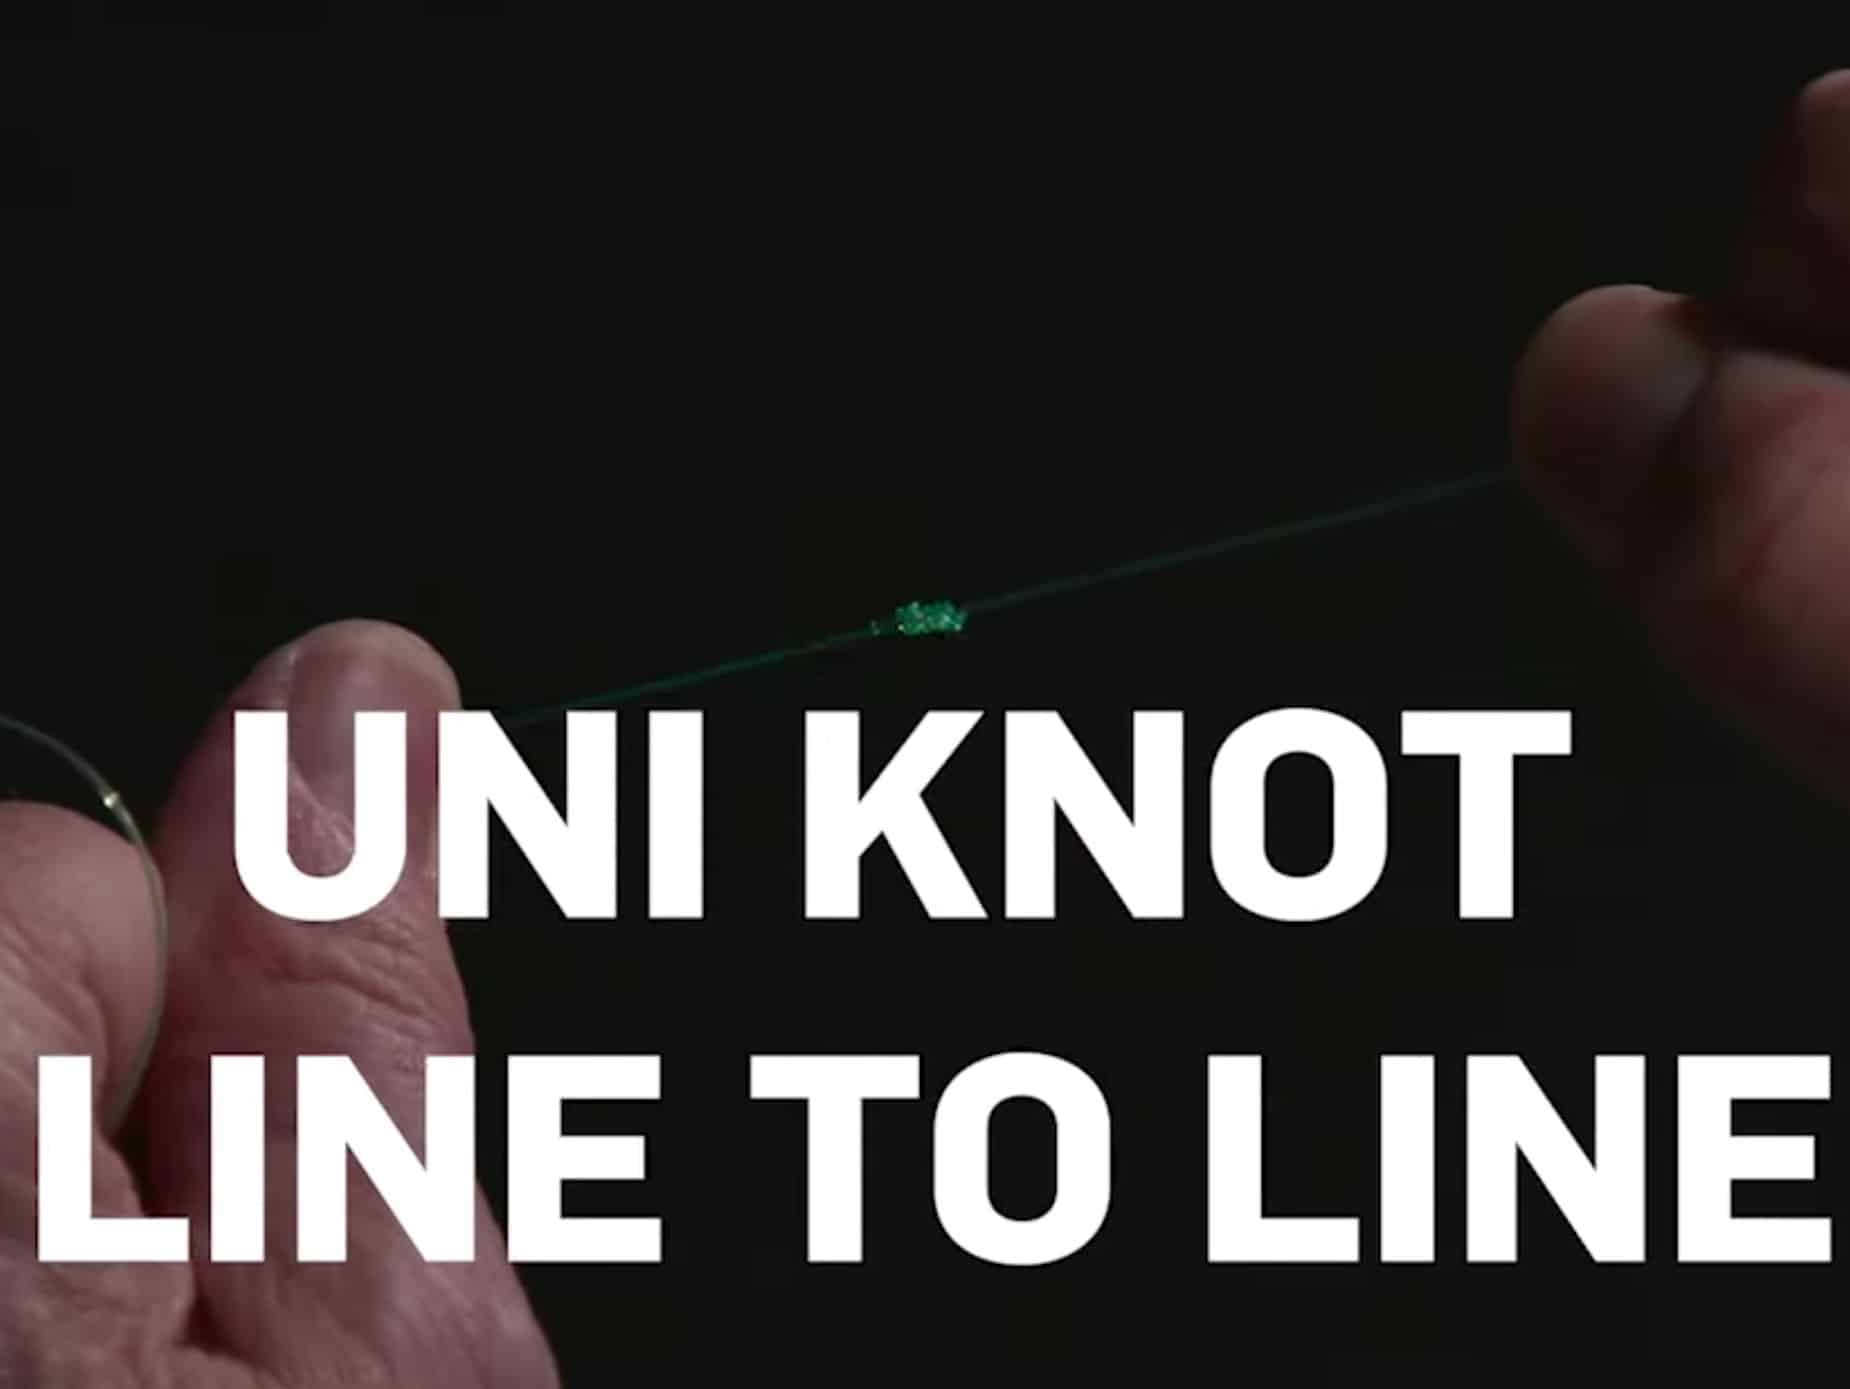 How to Tie a Uni-Knot Joining Line to Line